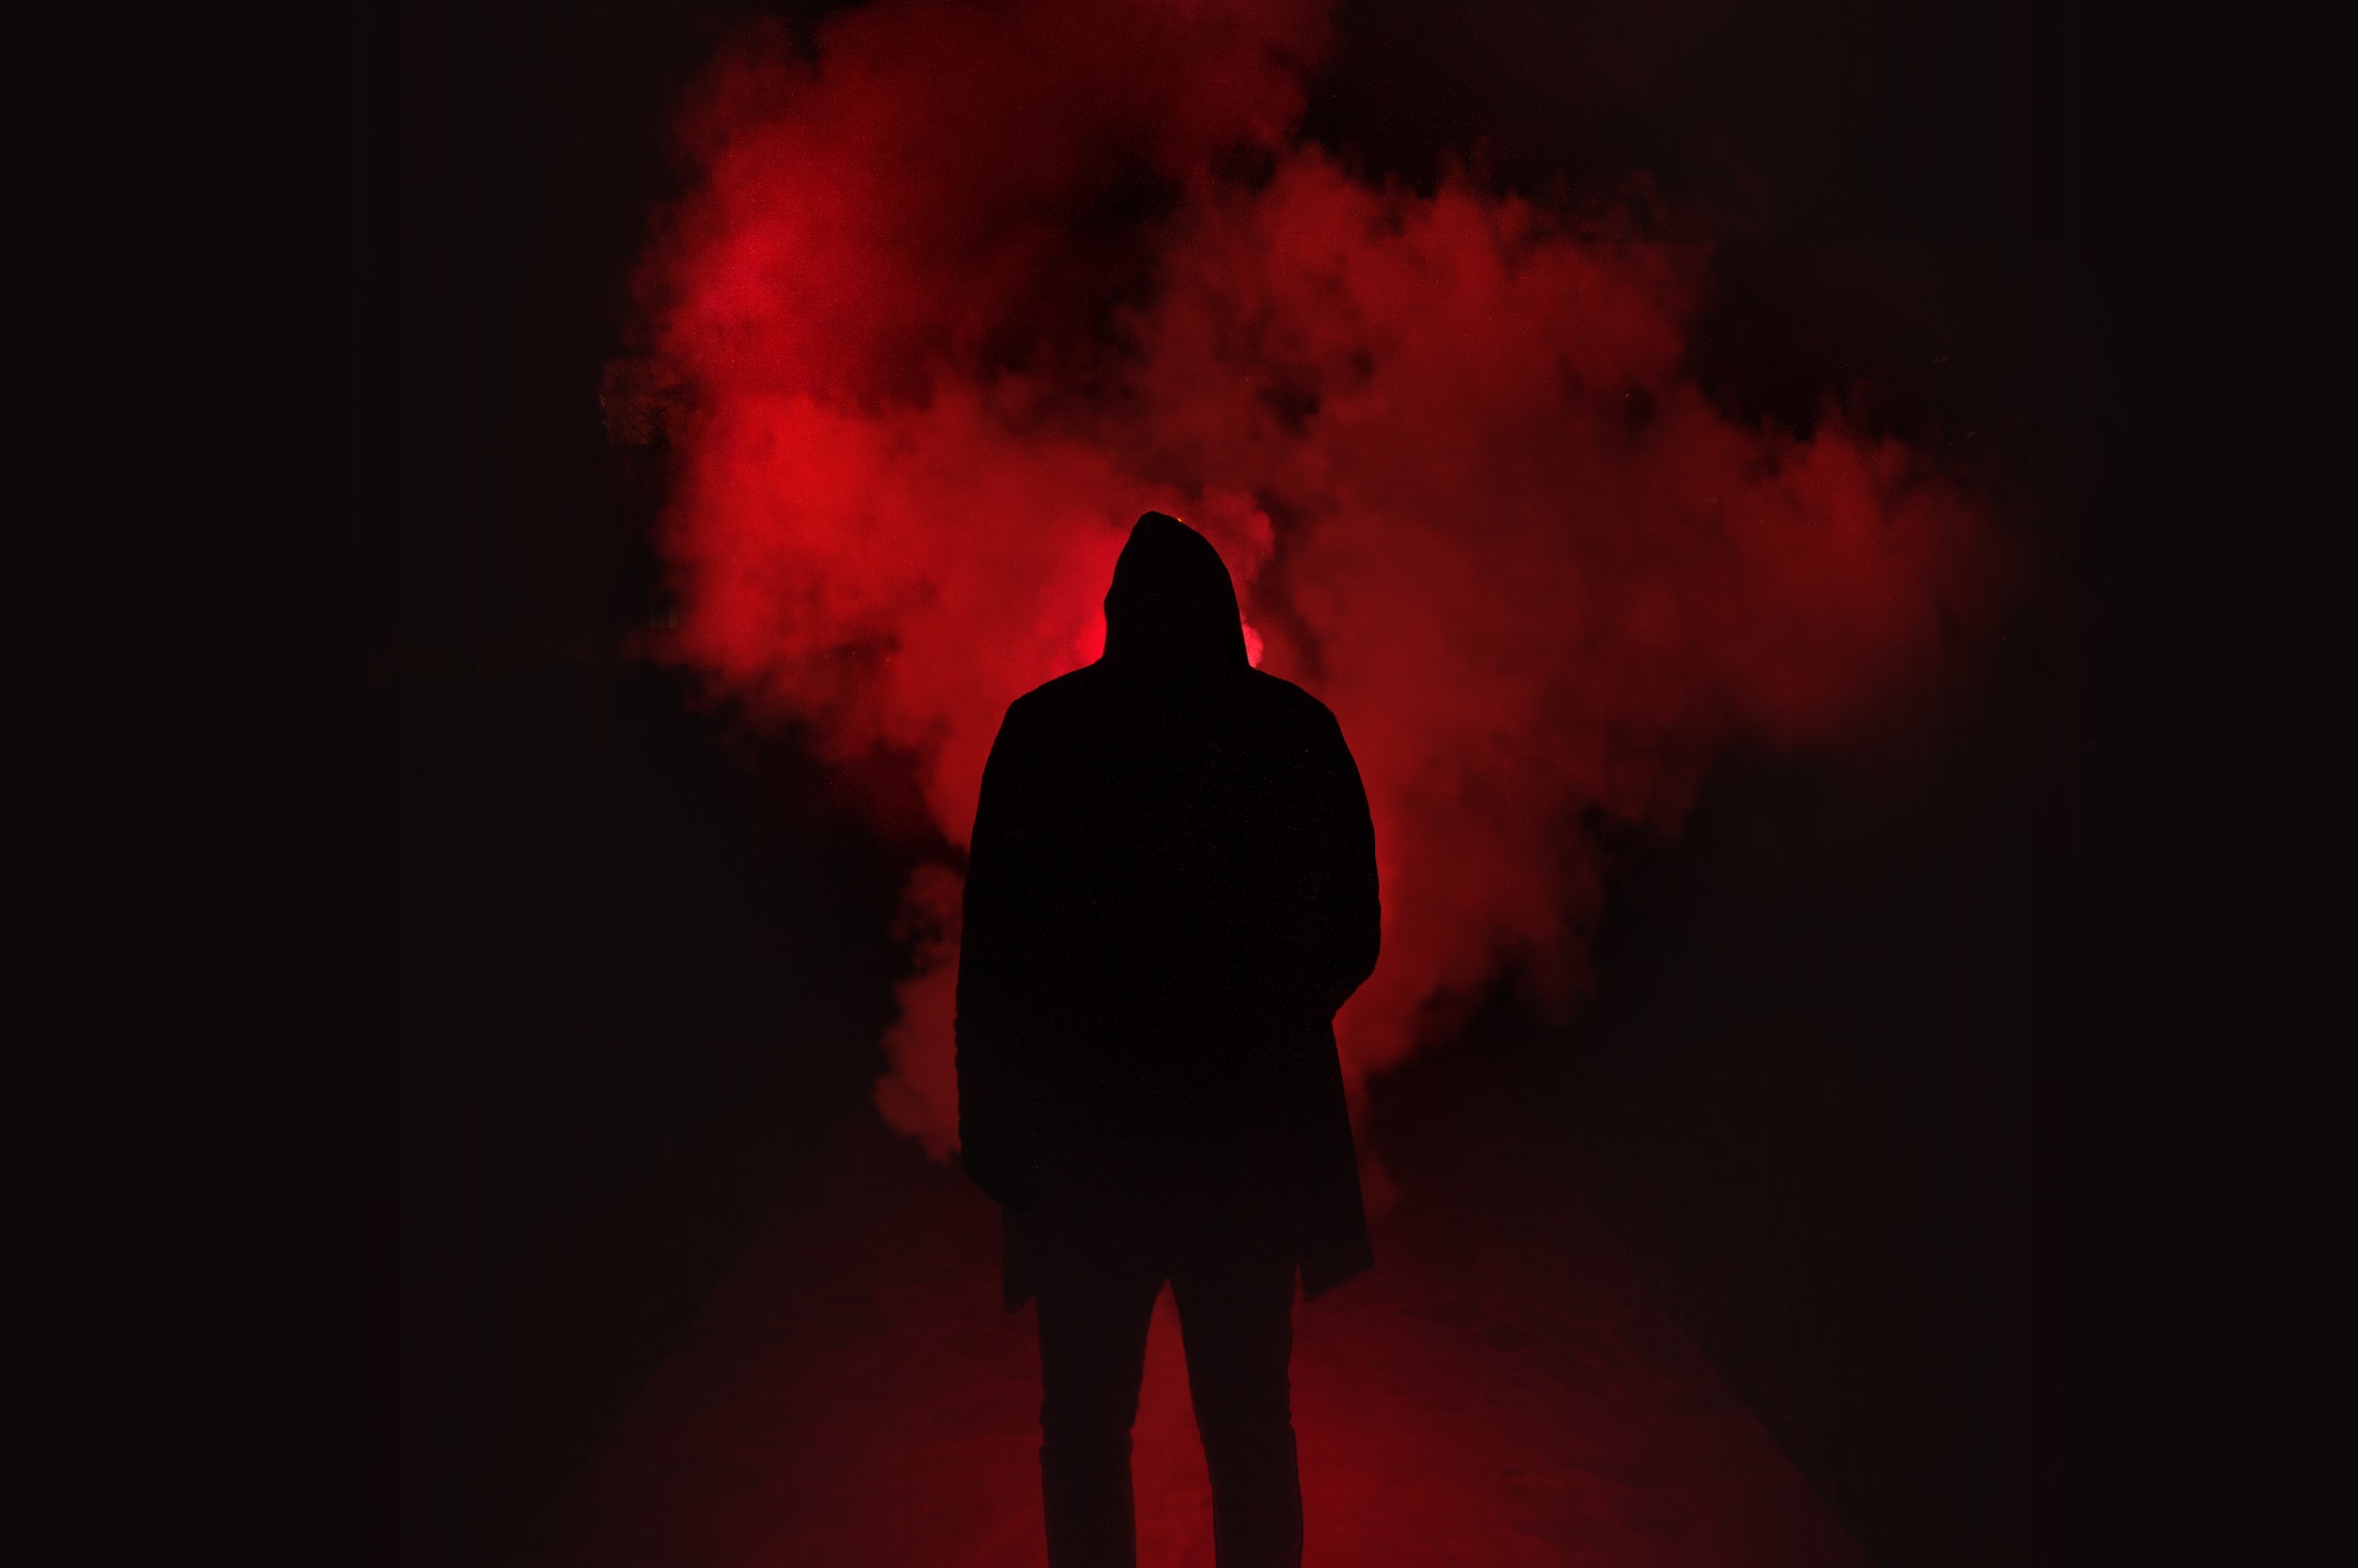 The silhouette of a man wearing a hoodie, on a black backdrop with red smoke.